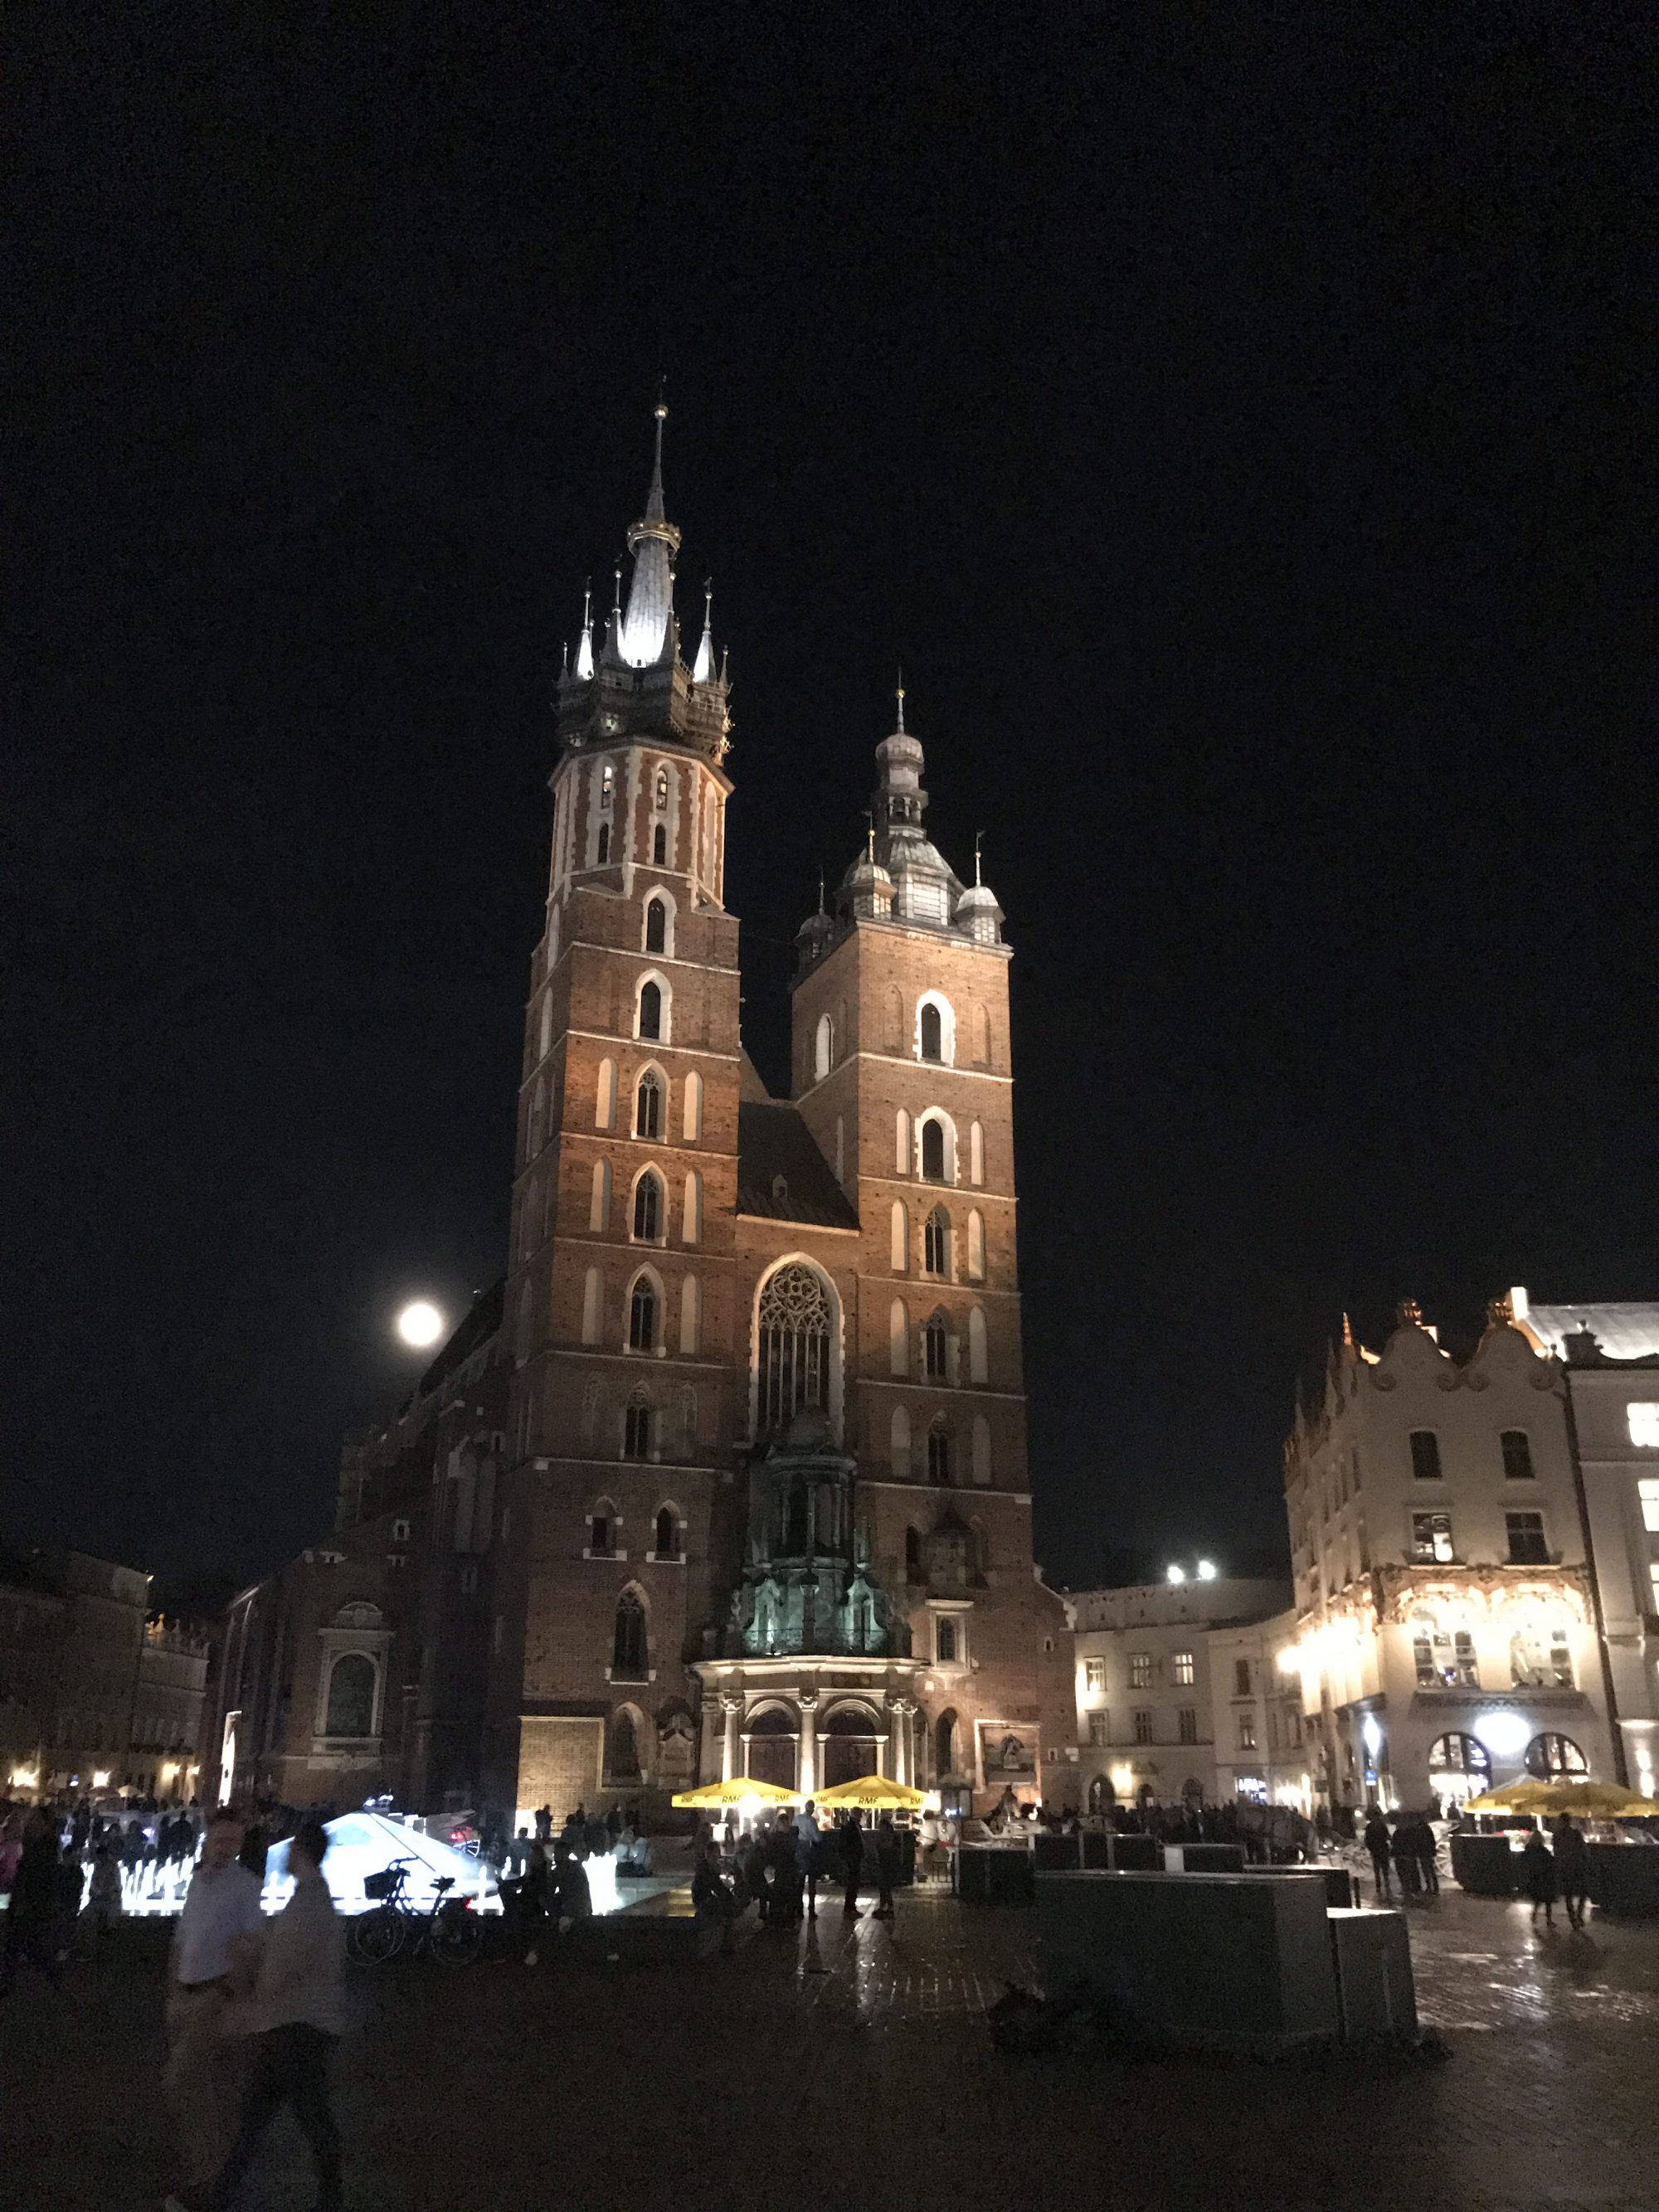 Old Town Krakow at night